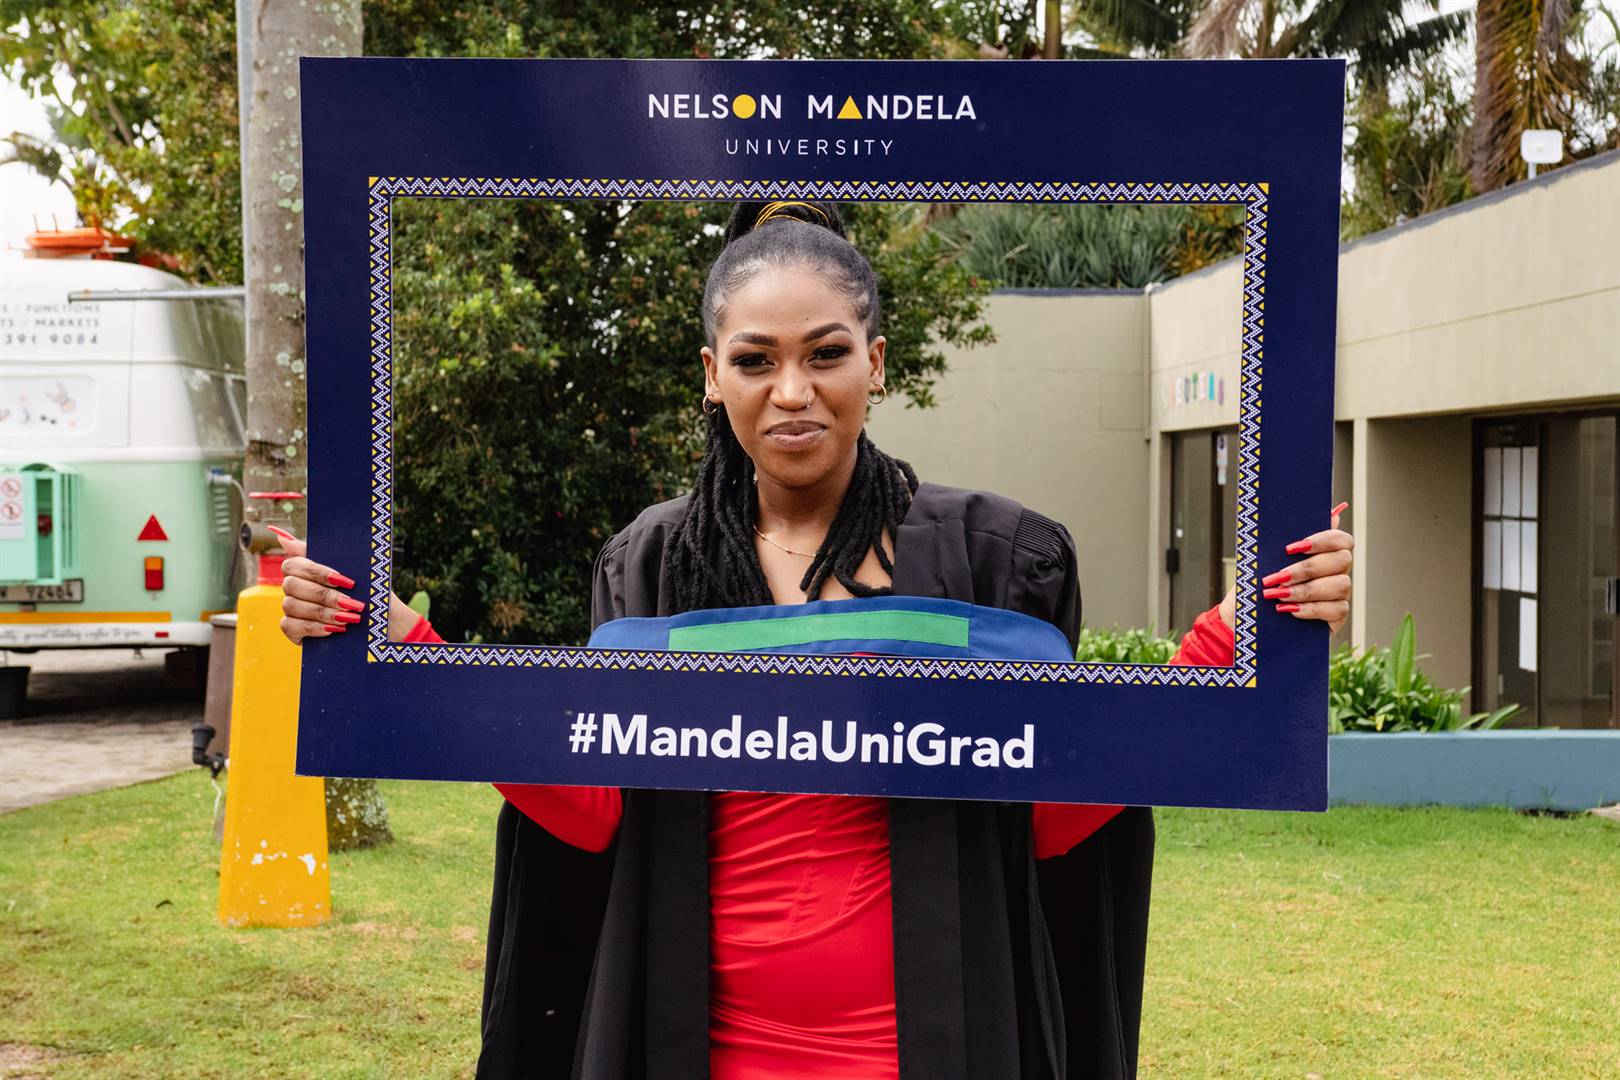 Nelson Mandela University graduate Entle Saba almost missed her graduation because the cab driver didn’t show up that morning to fetch her. Photo: Supplied